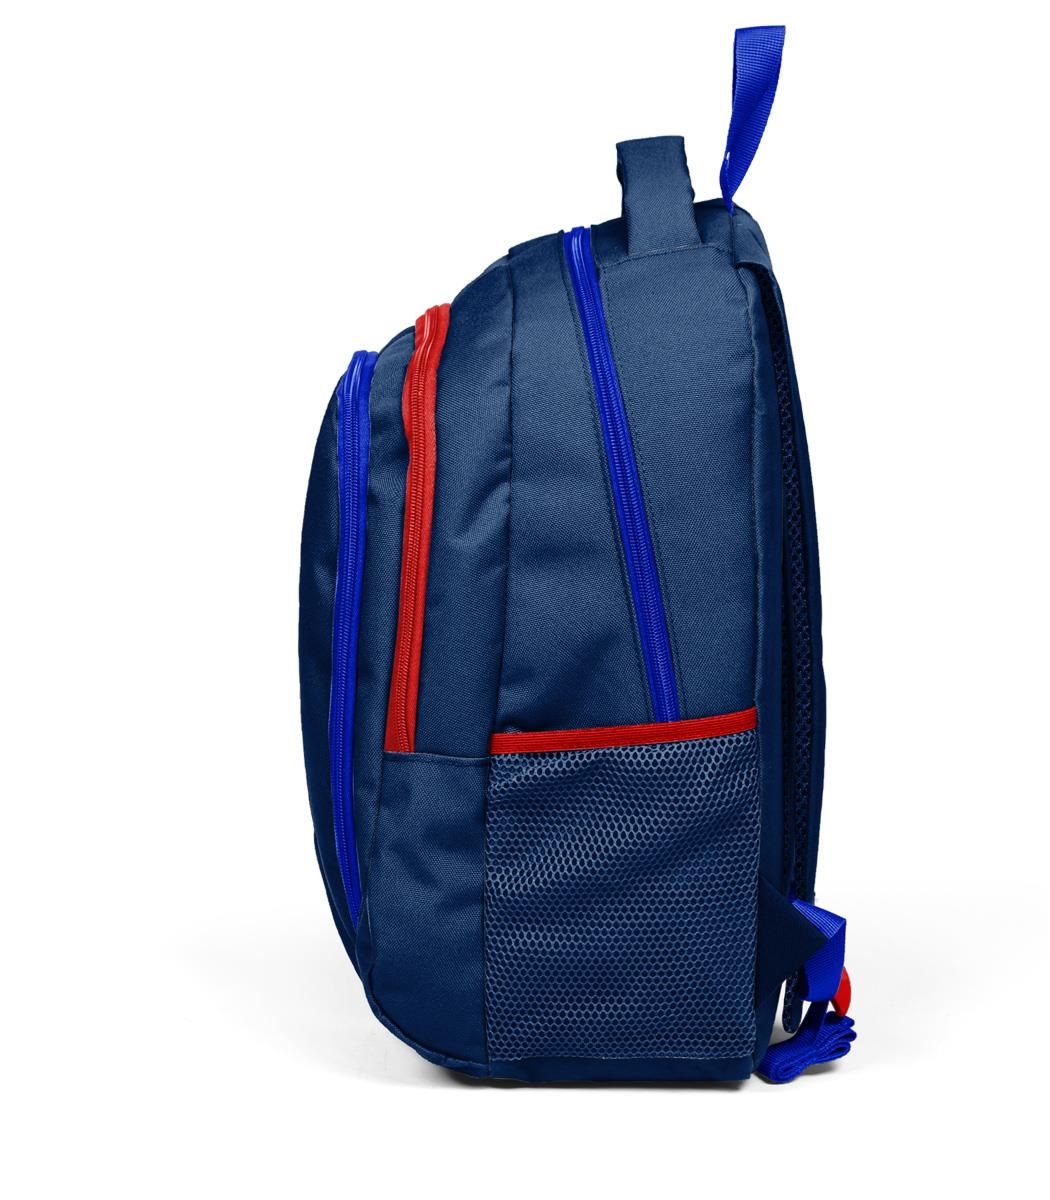 Coral High Sport Four Compartment Backpack - Navy Blue Red